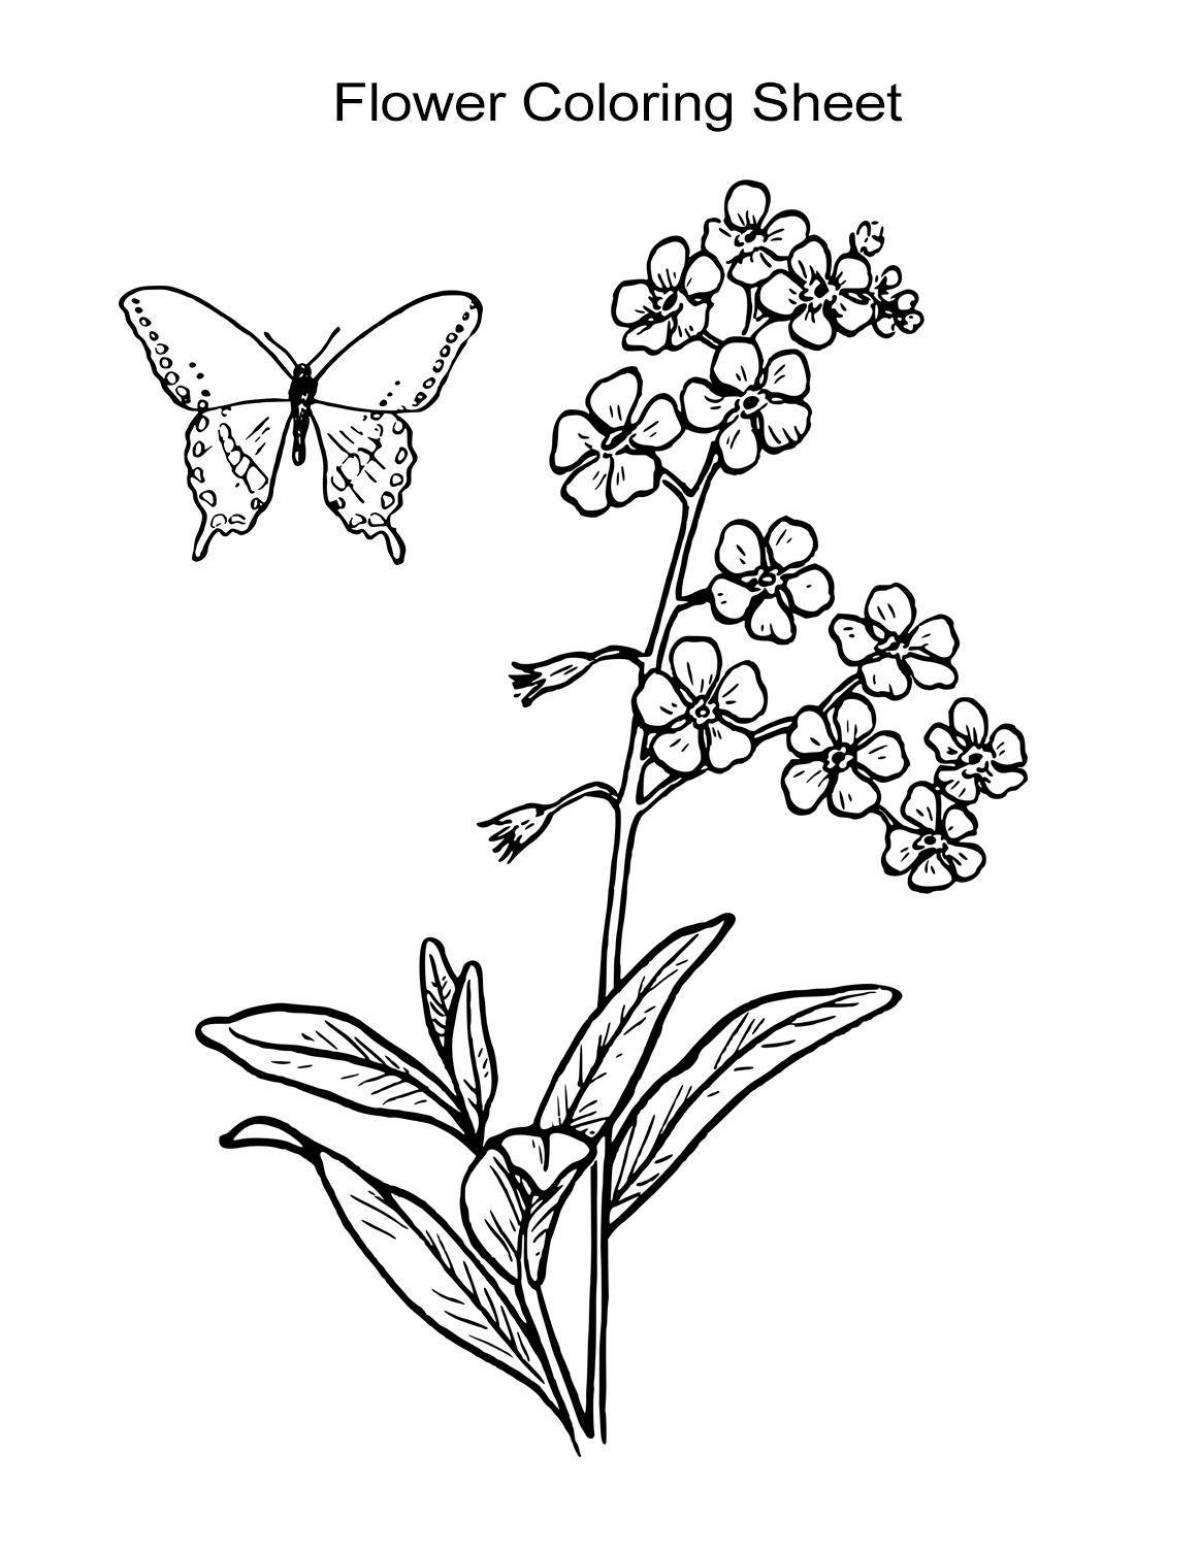 Bright forget-me-not flower coloring book